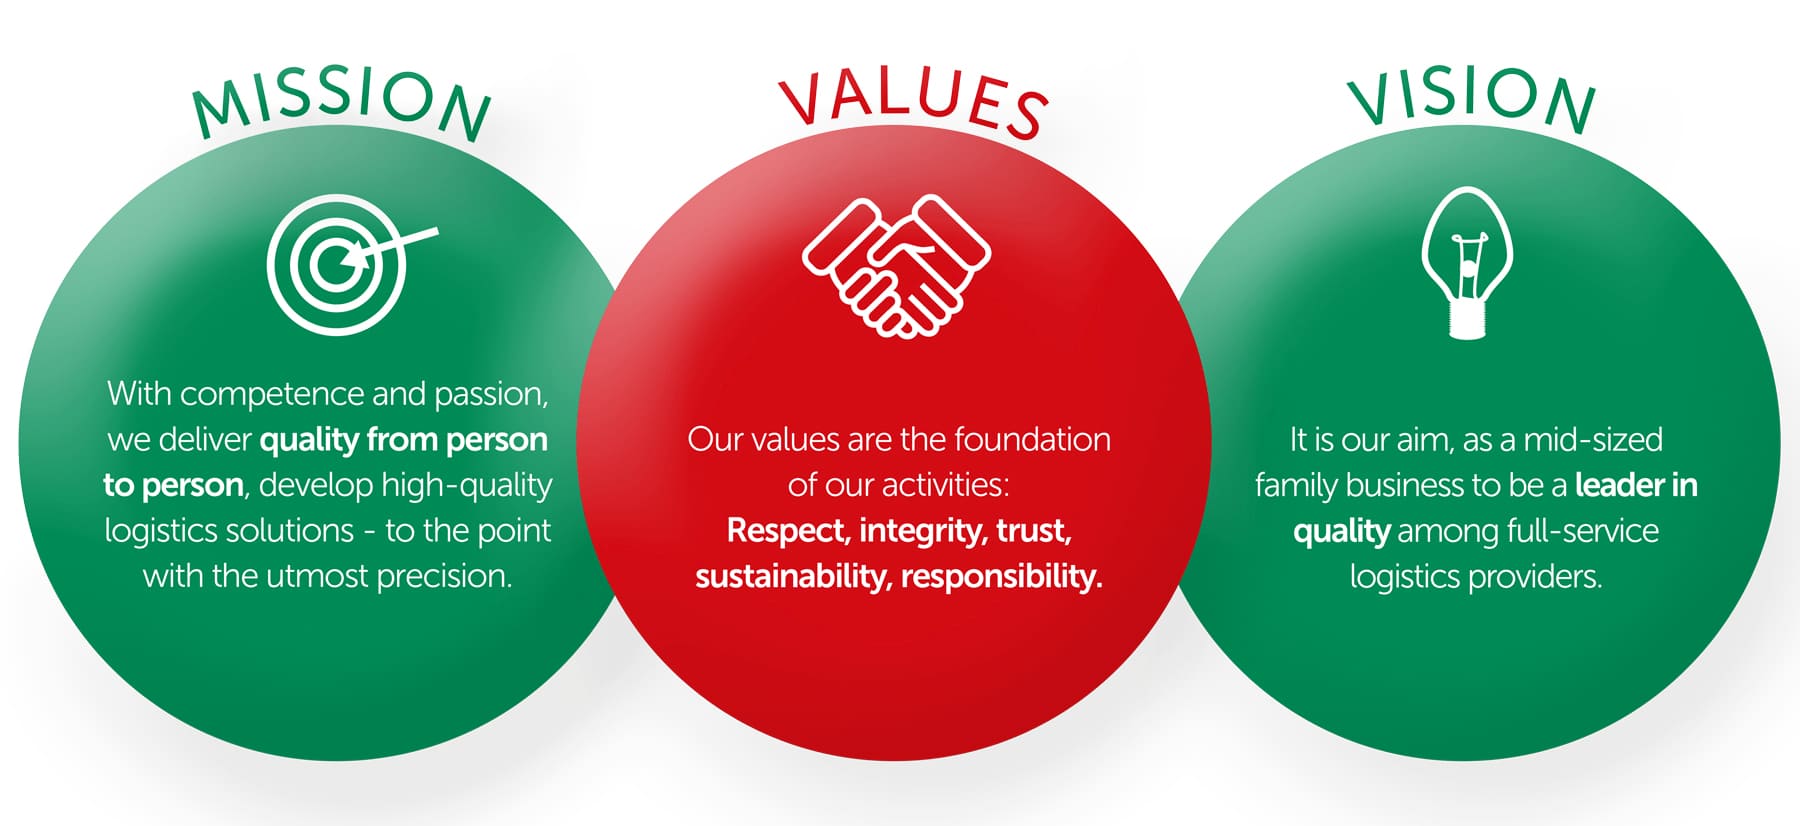 Mission Vision Values Graphic